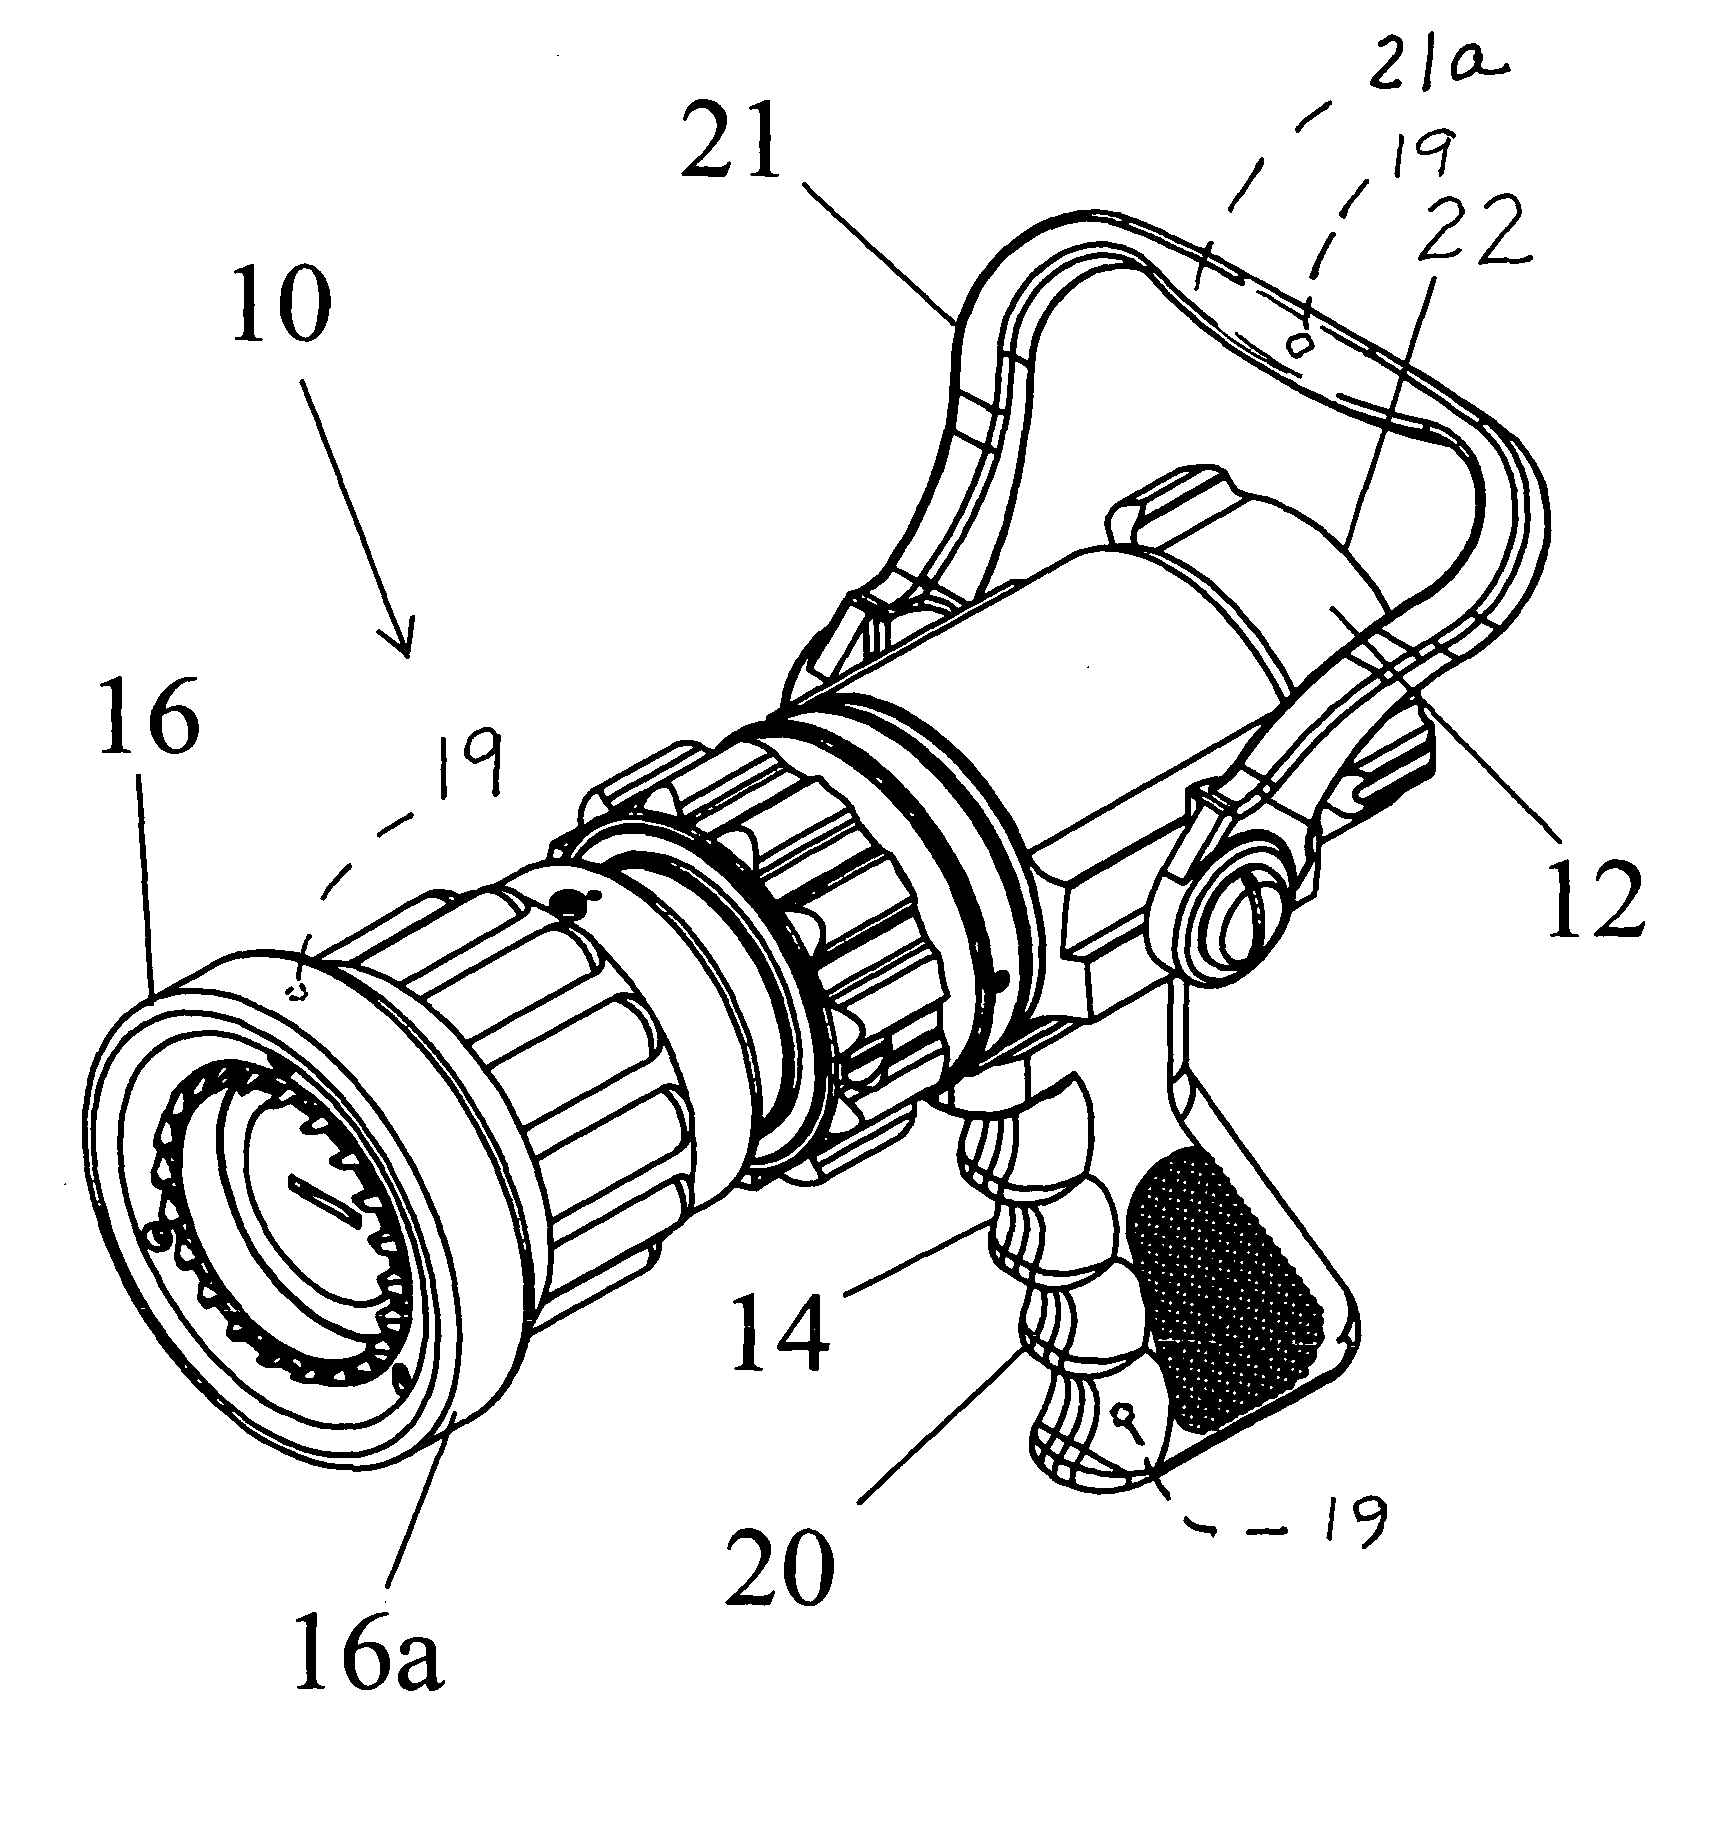 Firefighting device with light emitting component